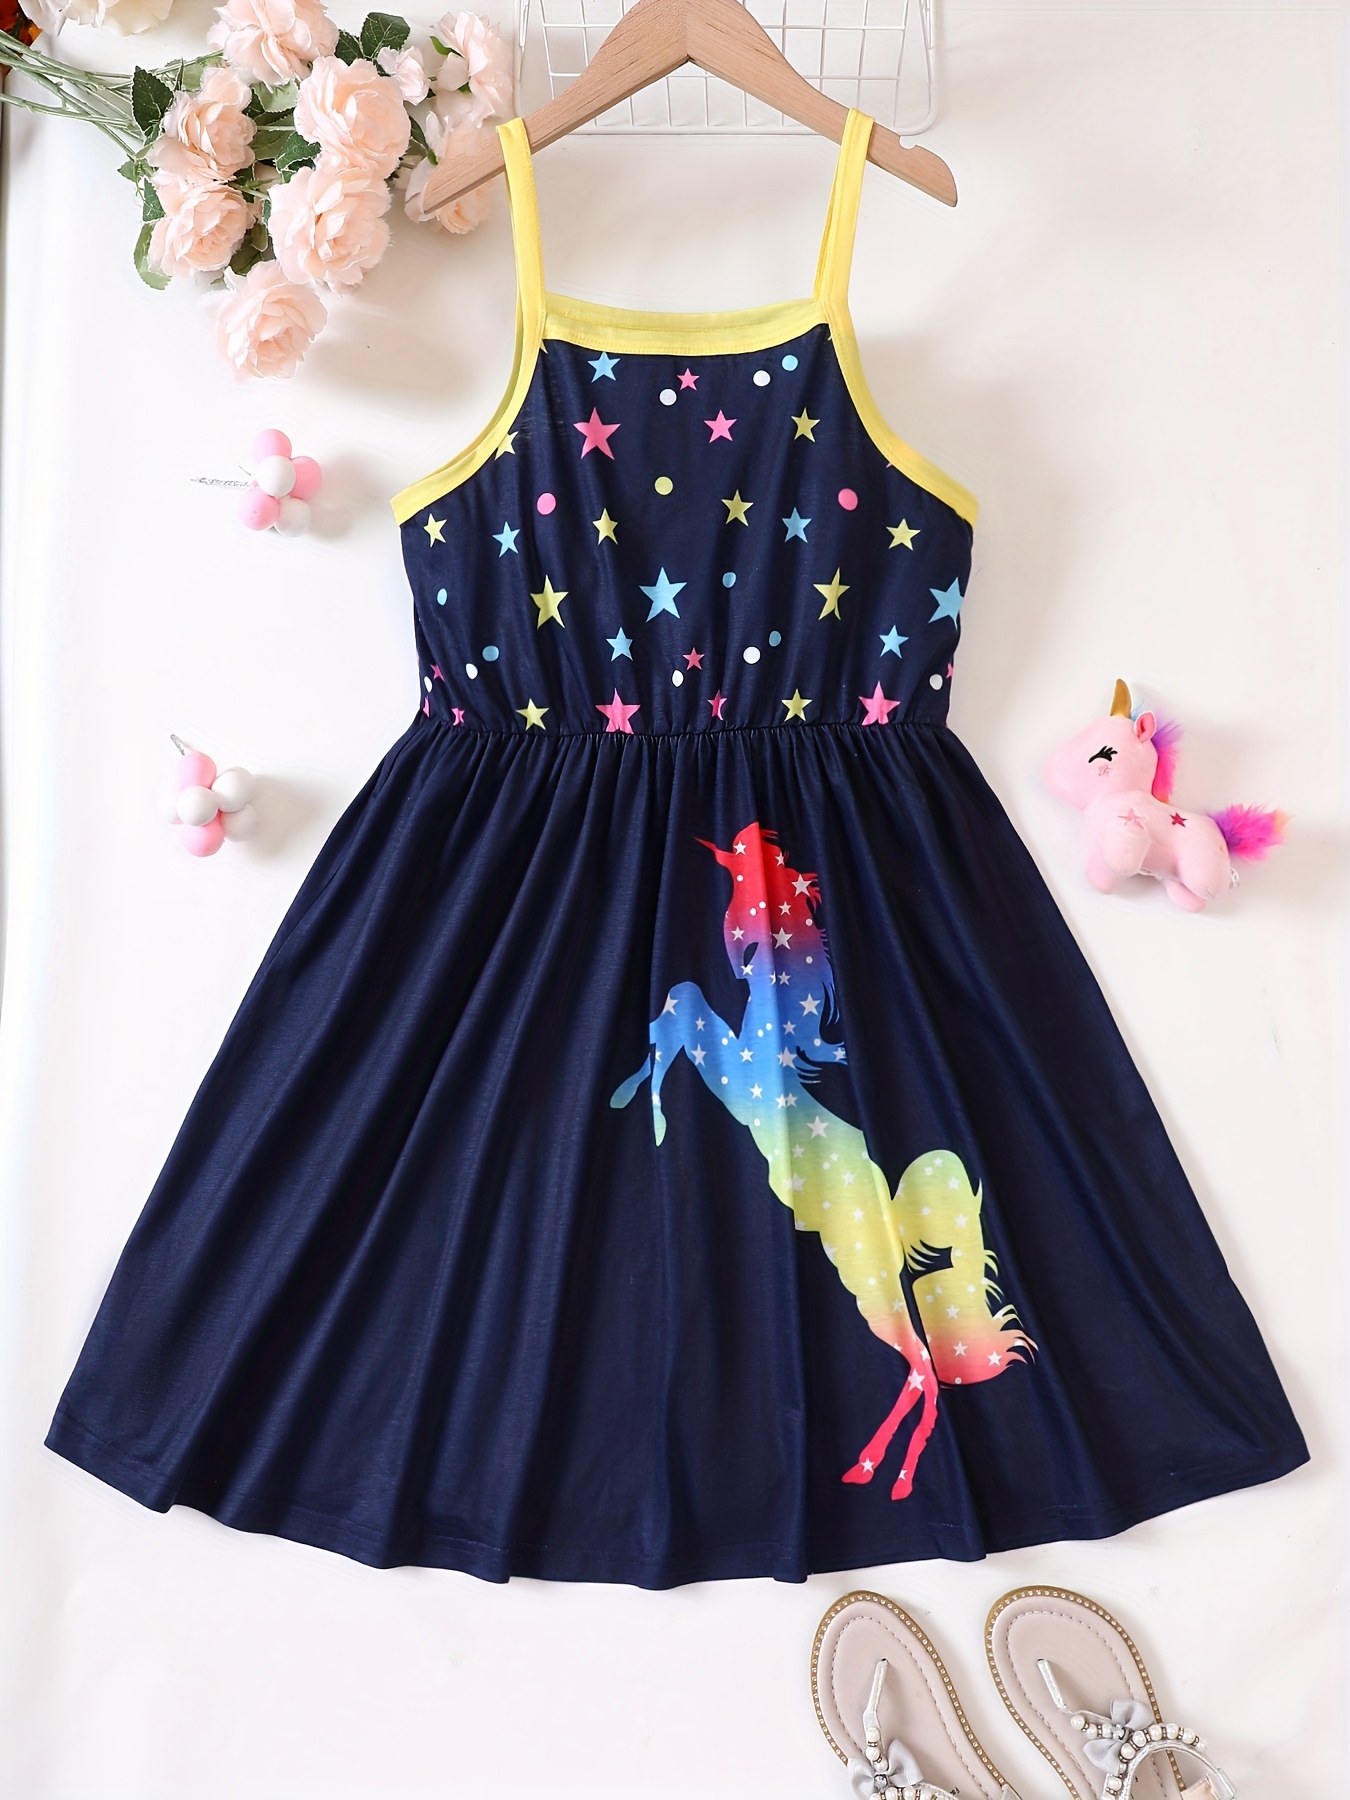  Blue Frock For Kids With Leggings For Style / Cute